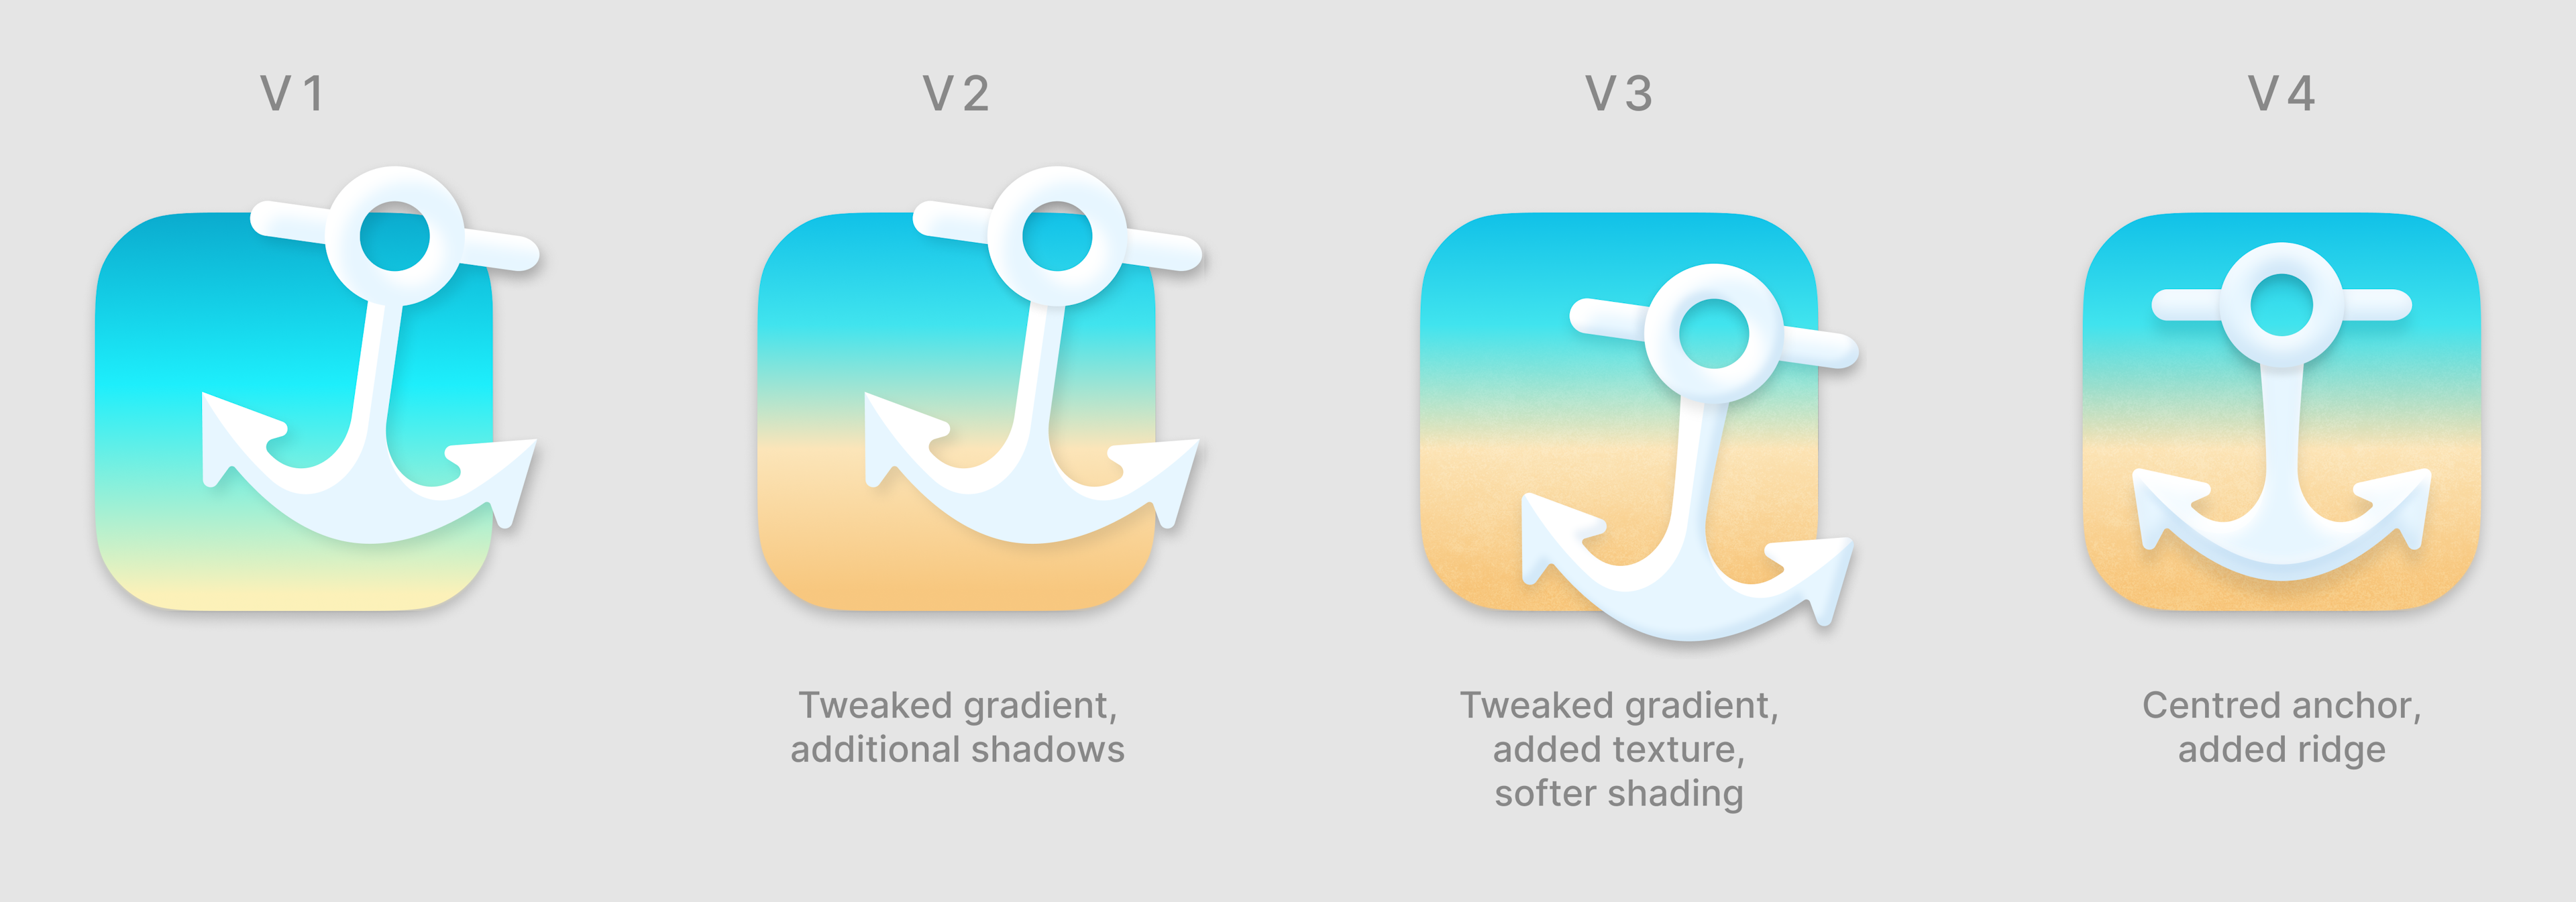 Four iterations of the Shiplog dock icon. Version 1 places the icon in the top right of a blue-to-yellow gradient. Version 2 tweaks the gradient to be less harsh and adds shadows to the anchor. Version 3 tweaks the gradient again, and adds a grain texture. Version 4 centres the anchor in the middle of the icon shape, and adds a ridge to the lower part of the anchor.